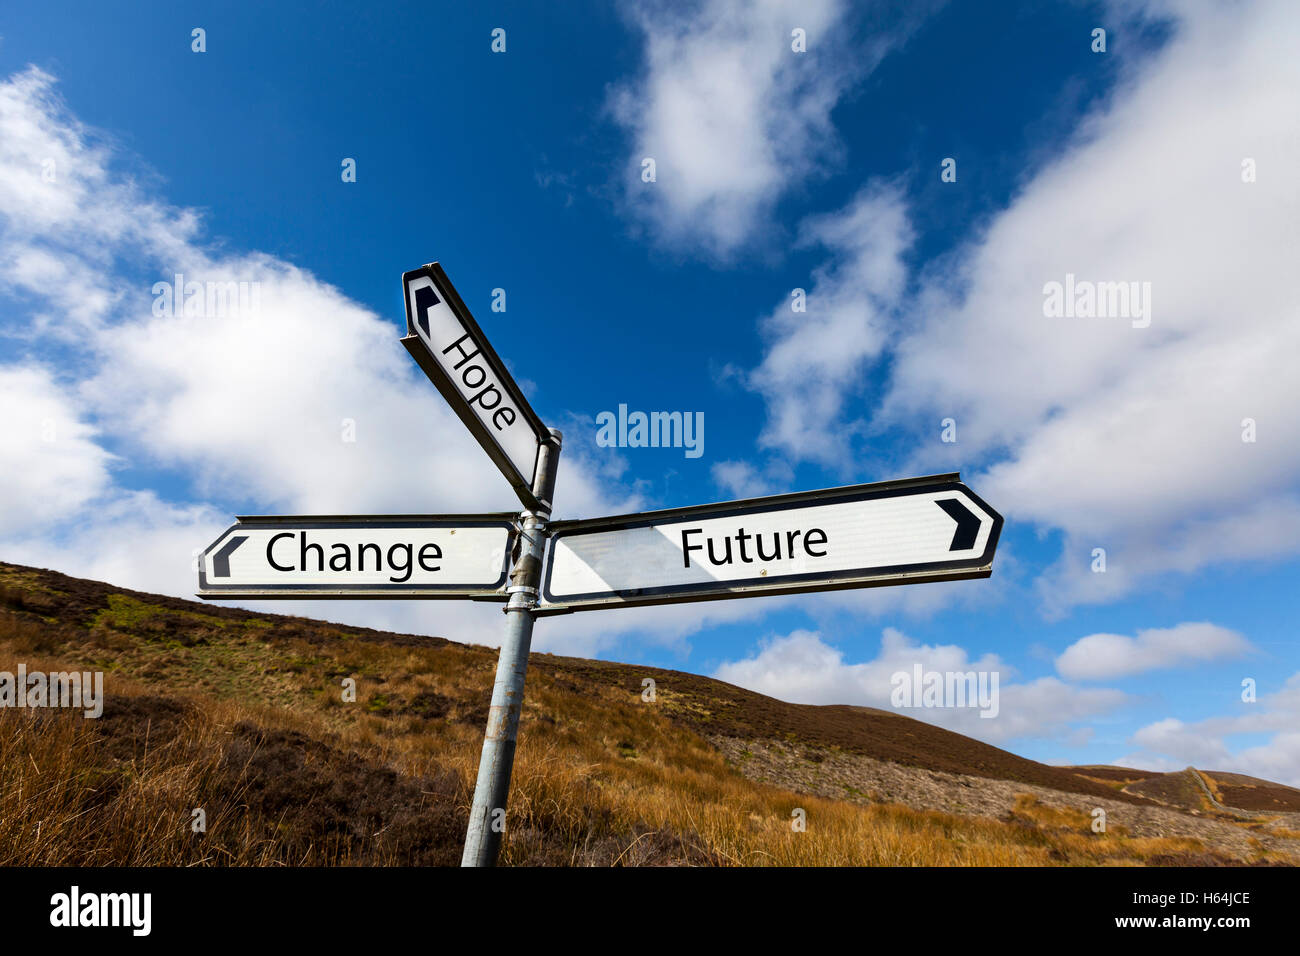 Future change hope future concept sign having hope wanting to change the future prospects outlook UK GB England Stock Photo